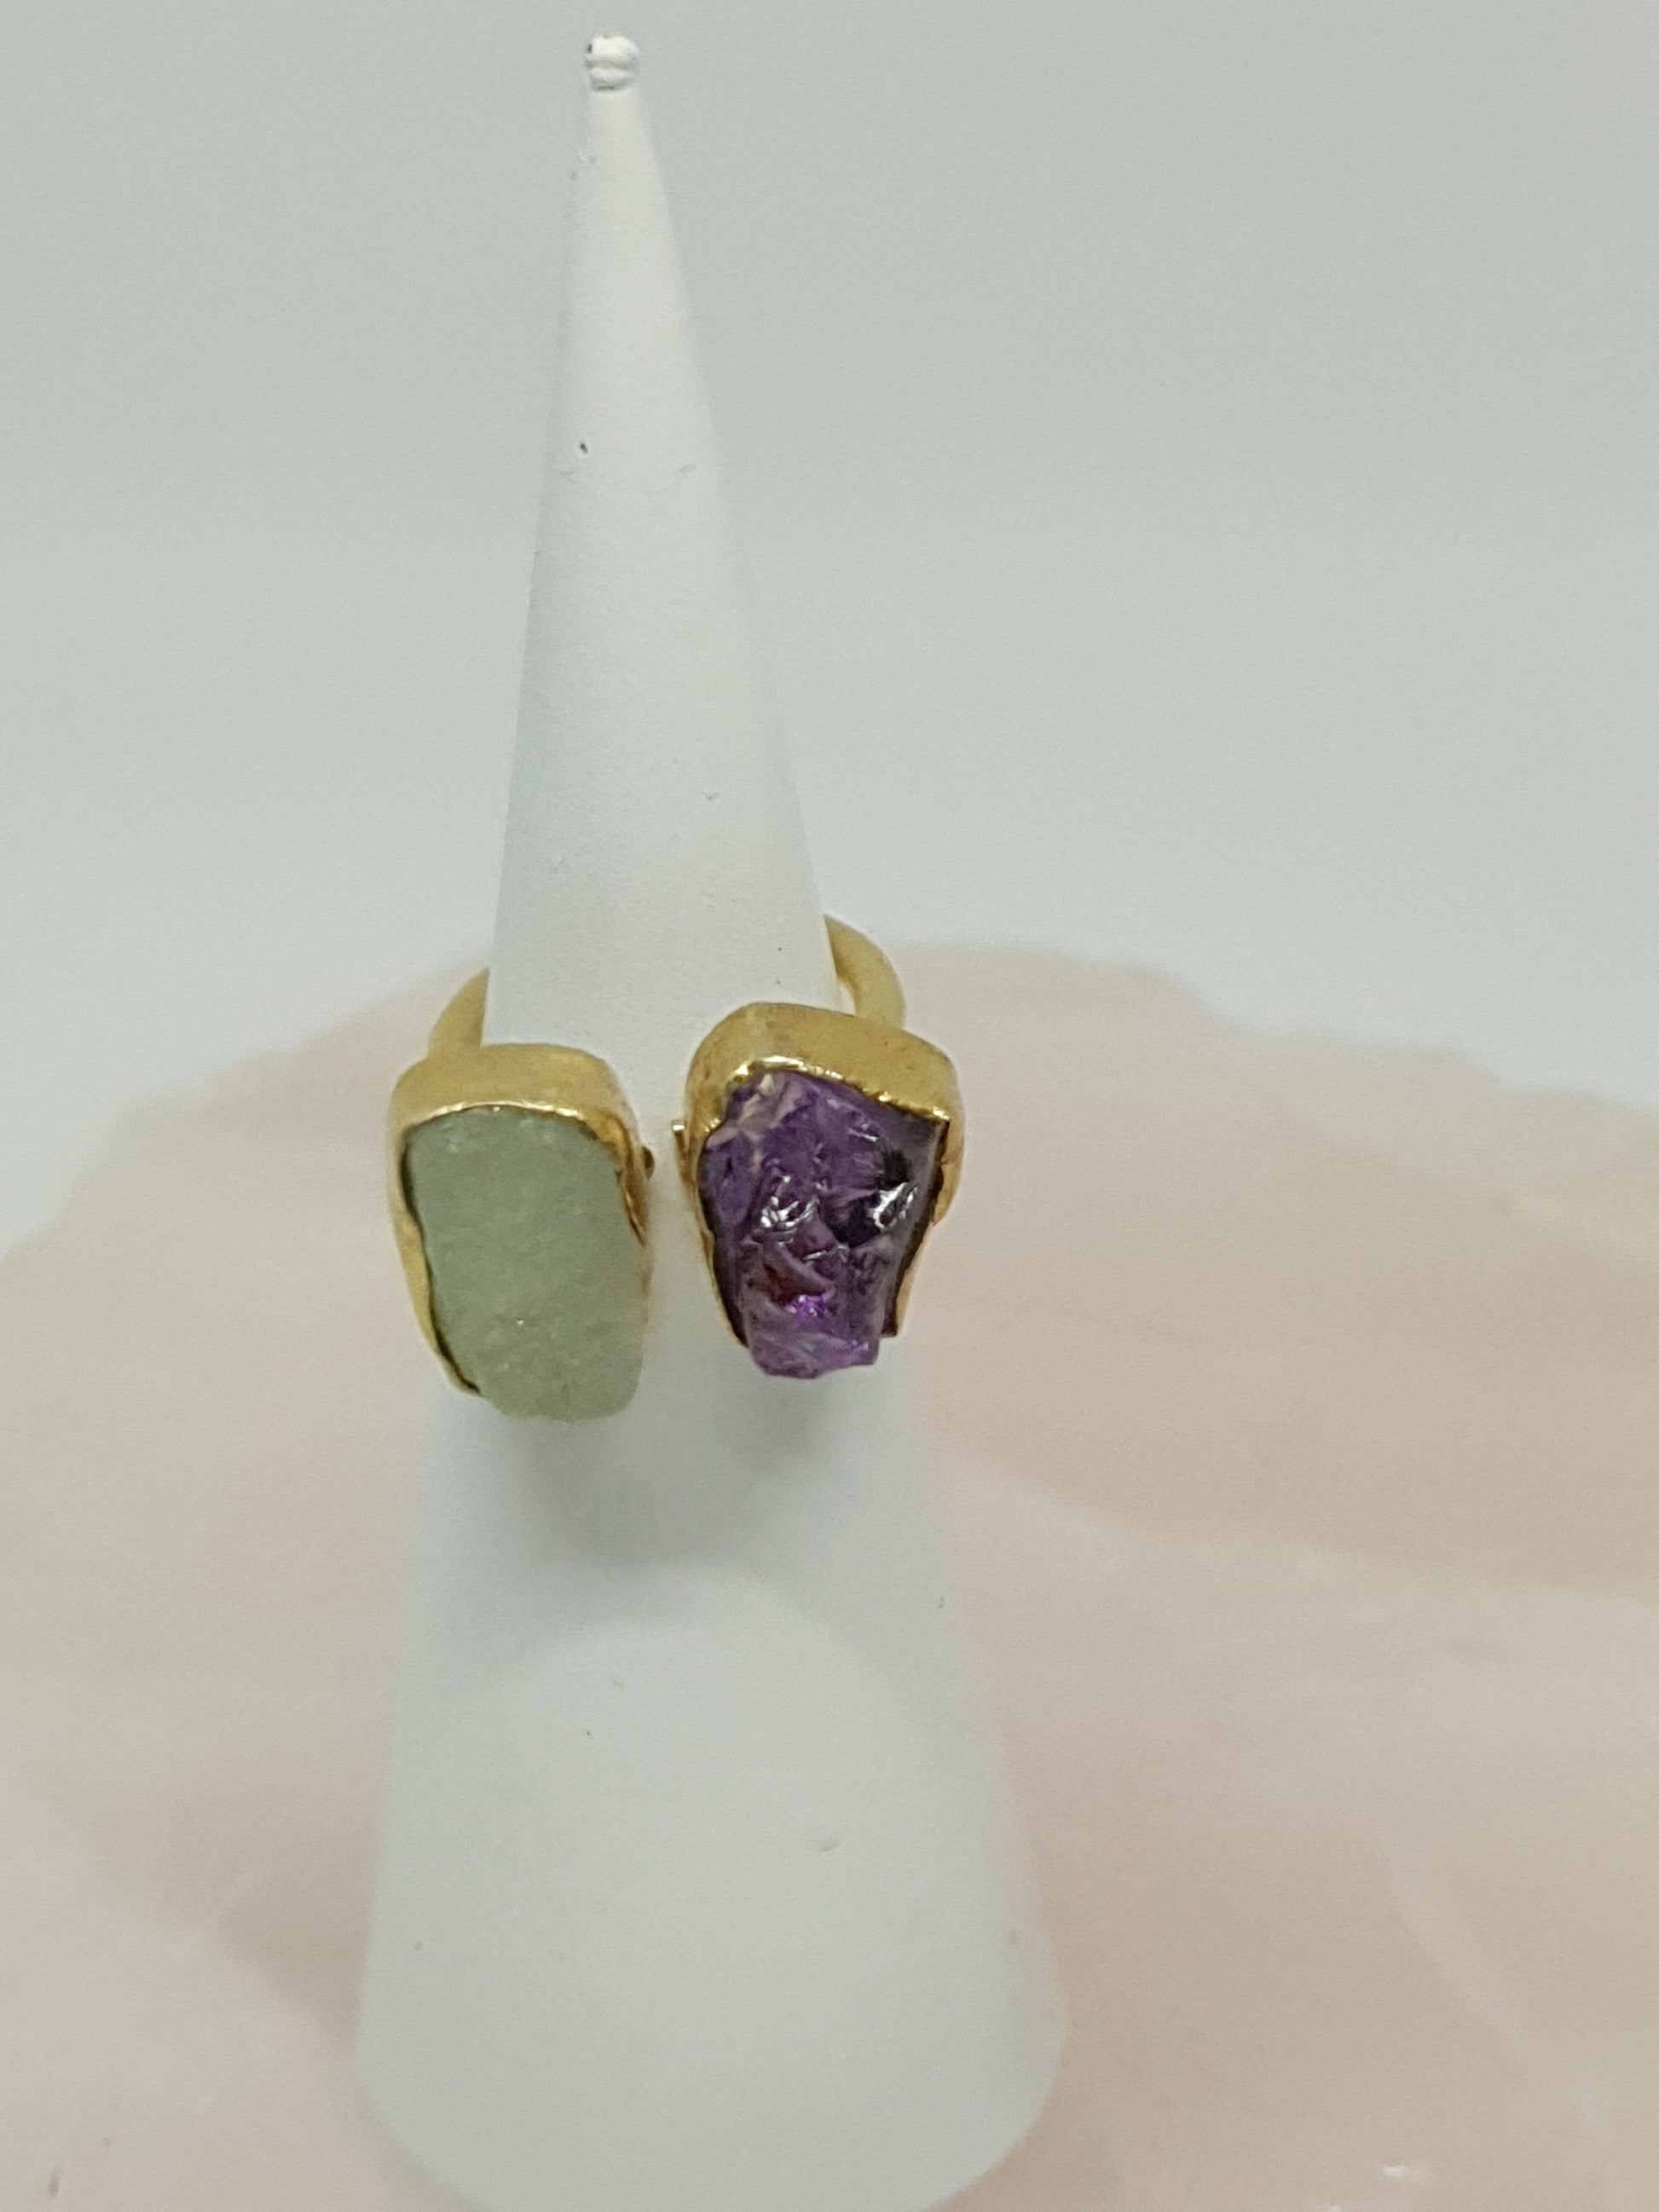 Raw cut crystals in a gold band